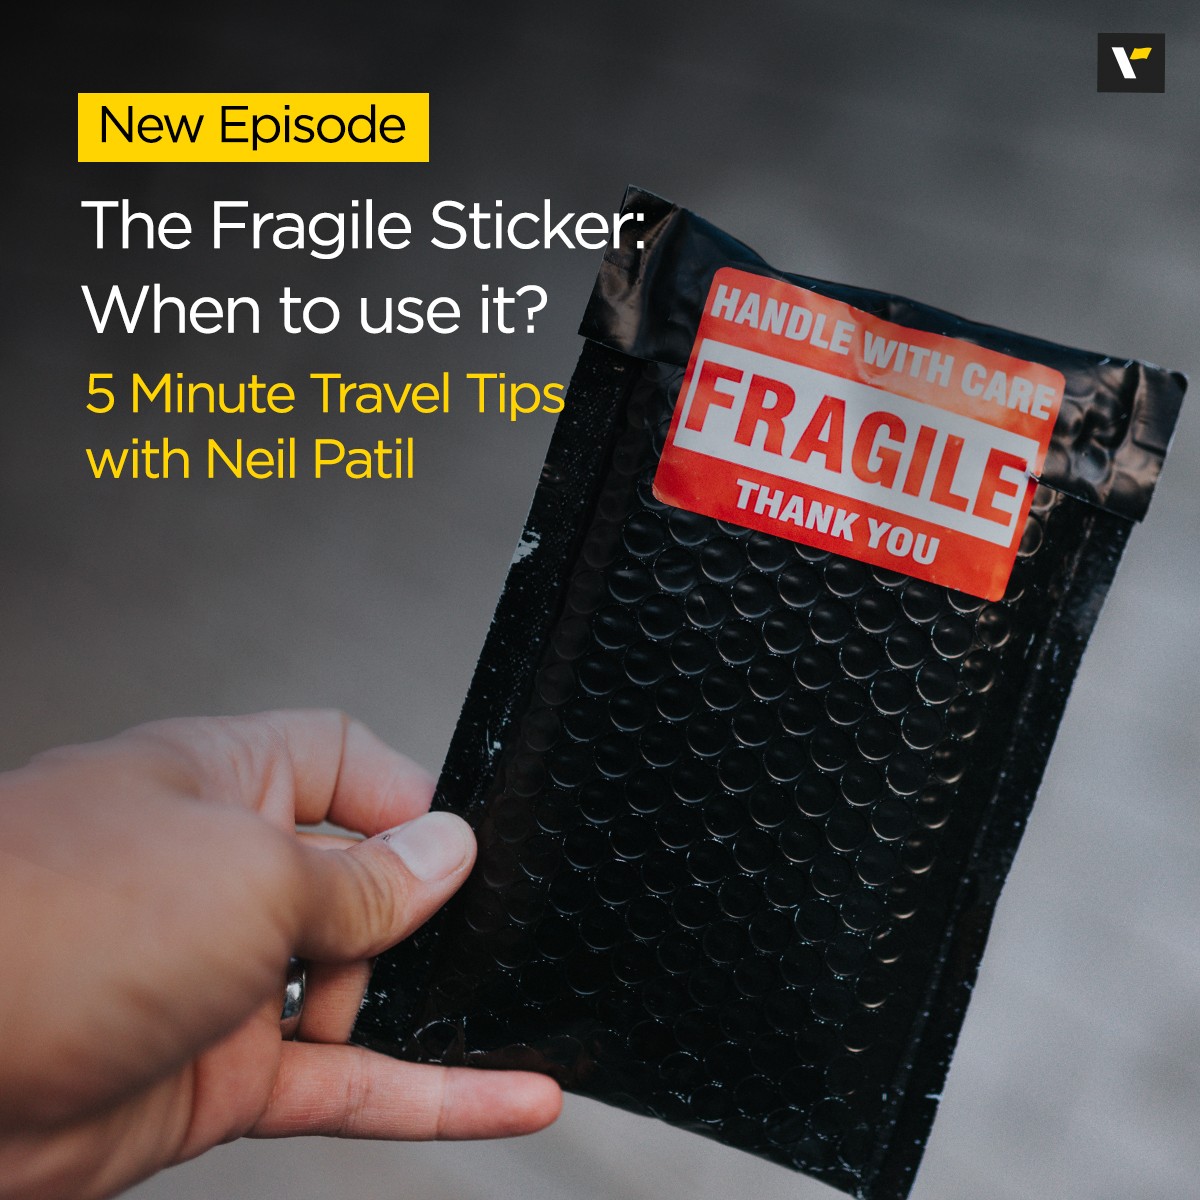 The Fragile Sticker: When to use it?